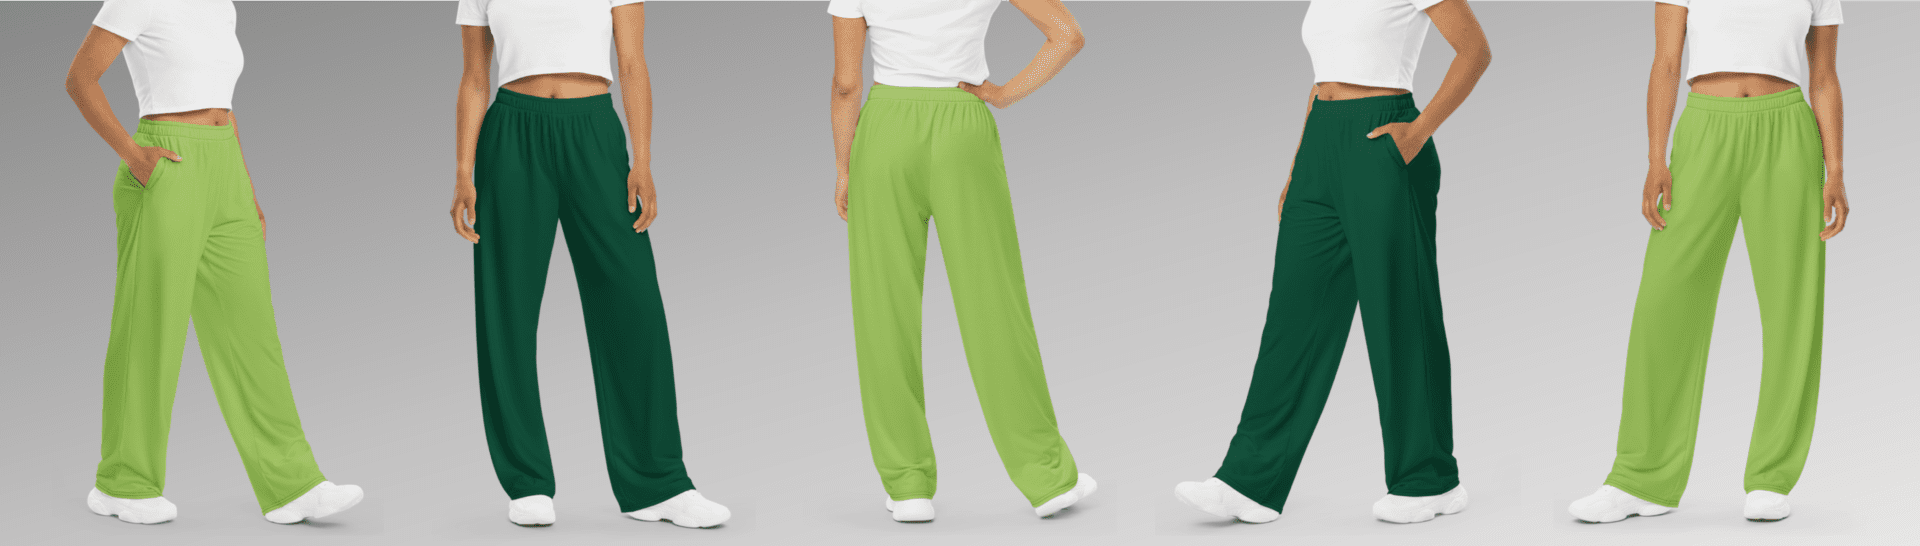 Five women modeling green and lime pants.